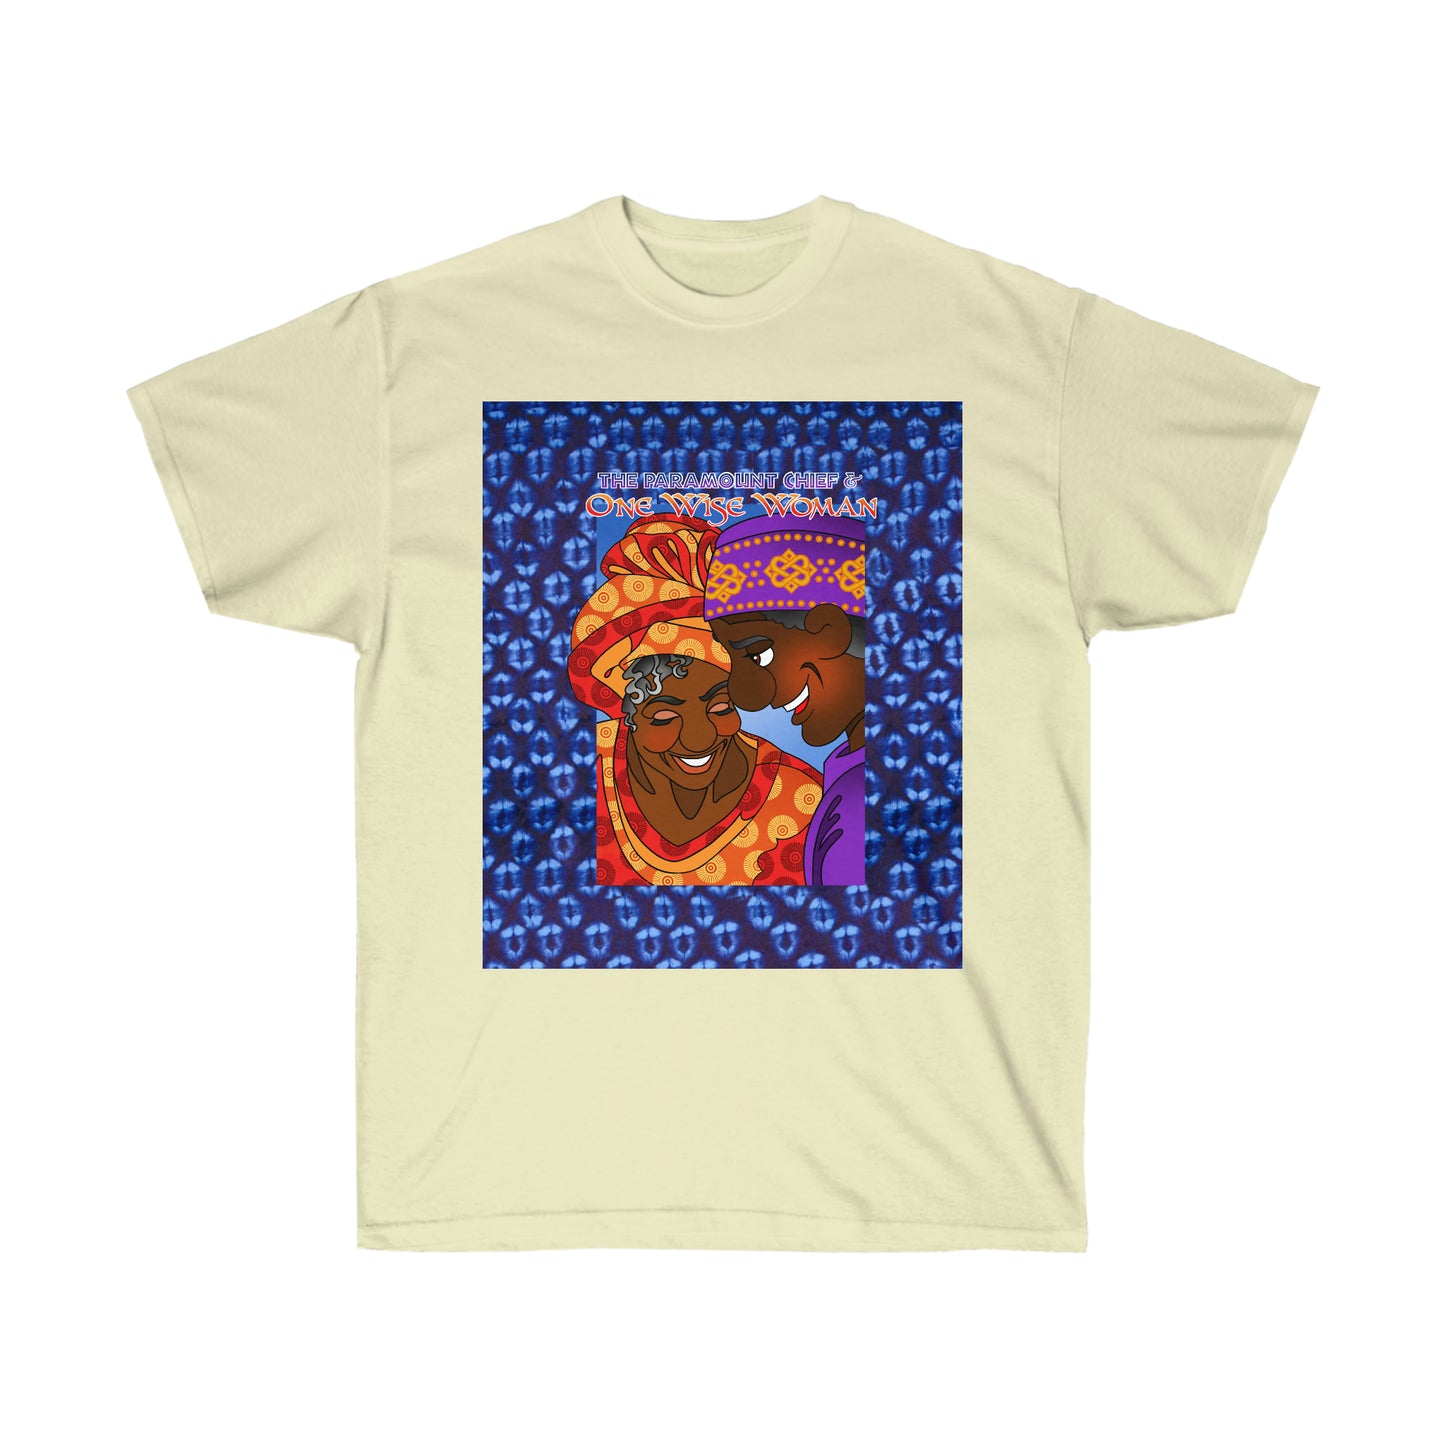 The Paramount Chief and One Wise Woman Unisex Ultra Cotton Tee